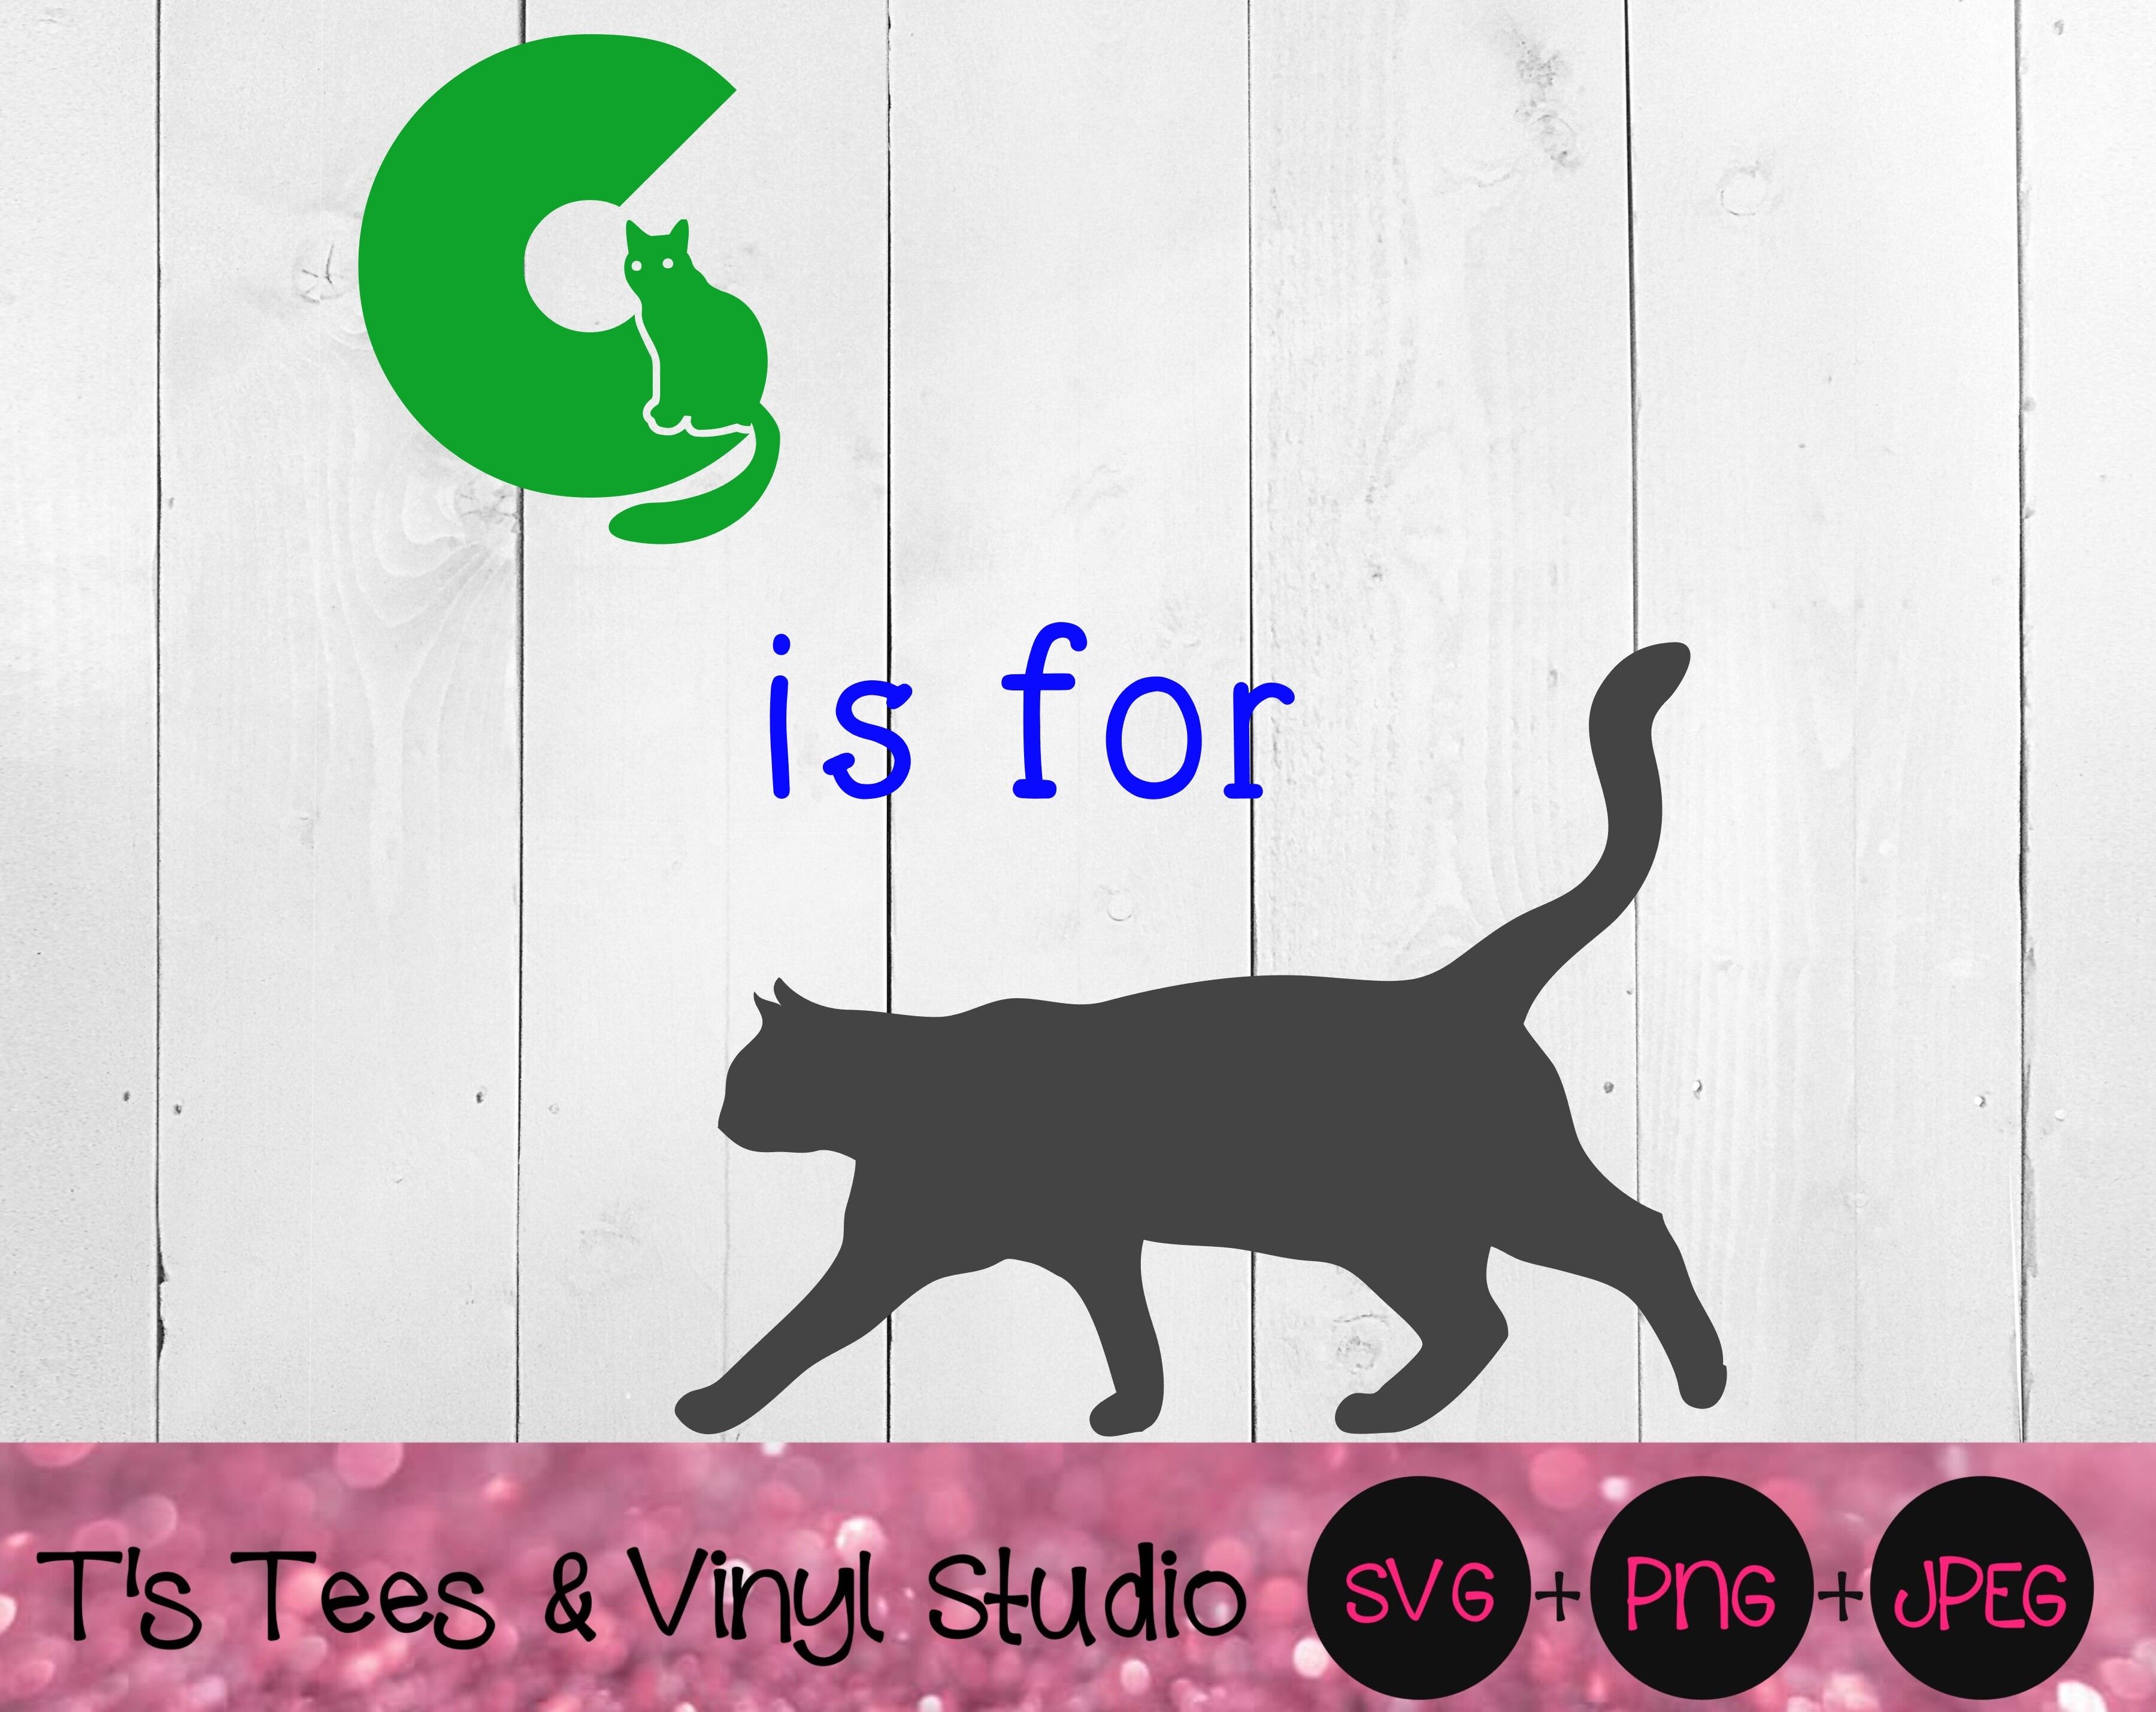 Cat Svg Letter Svg Baby Svg C Is For Cat Svg Learning Svg Cat Png By T S Tees Vinyl Studio Thehungryjpeg Com